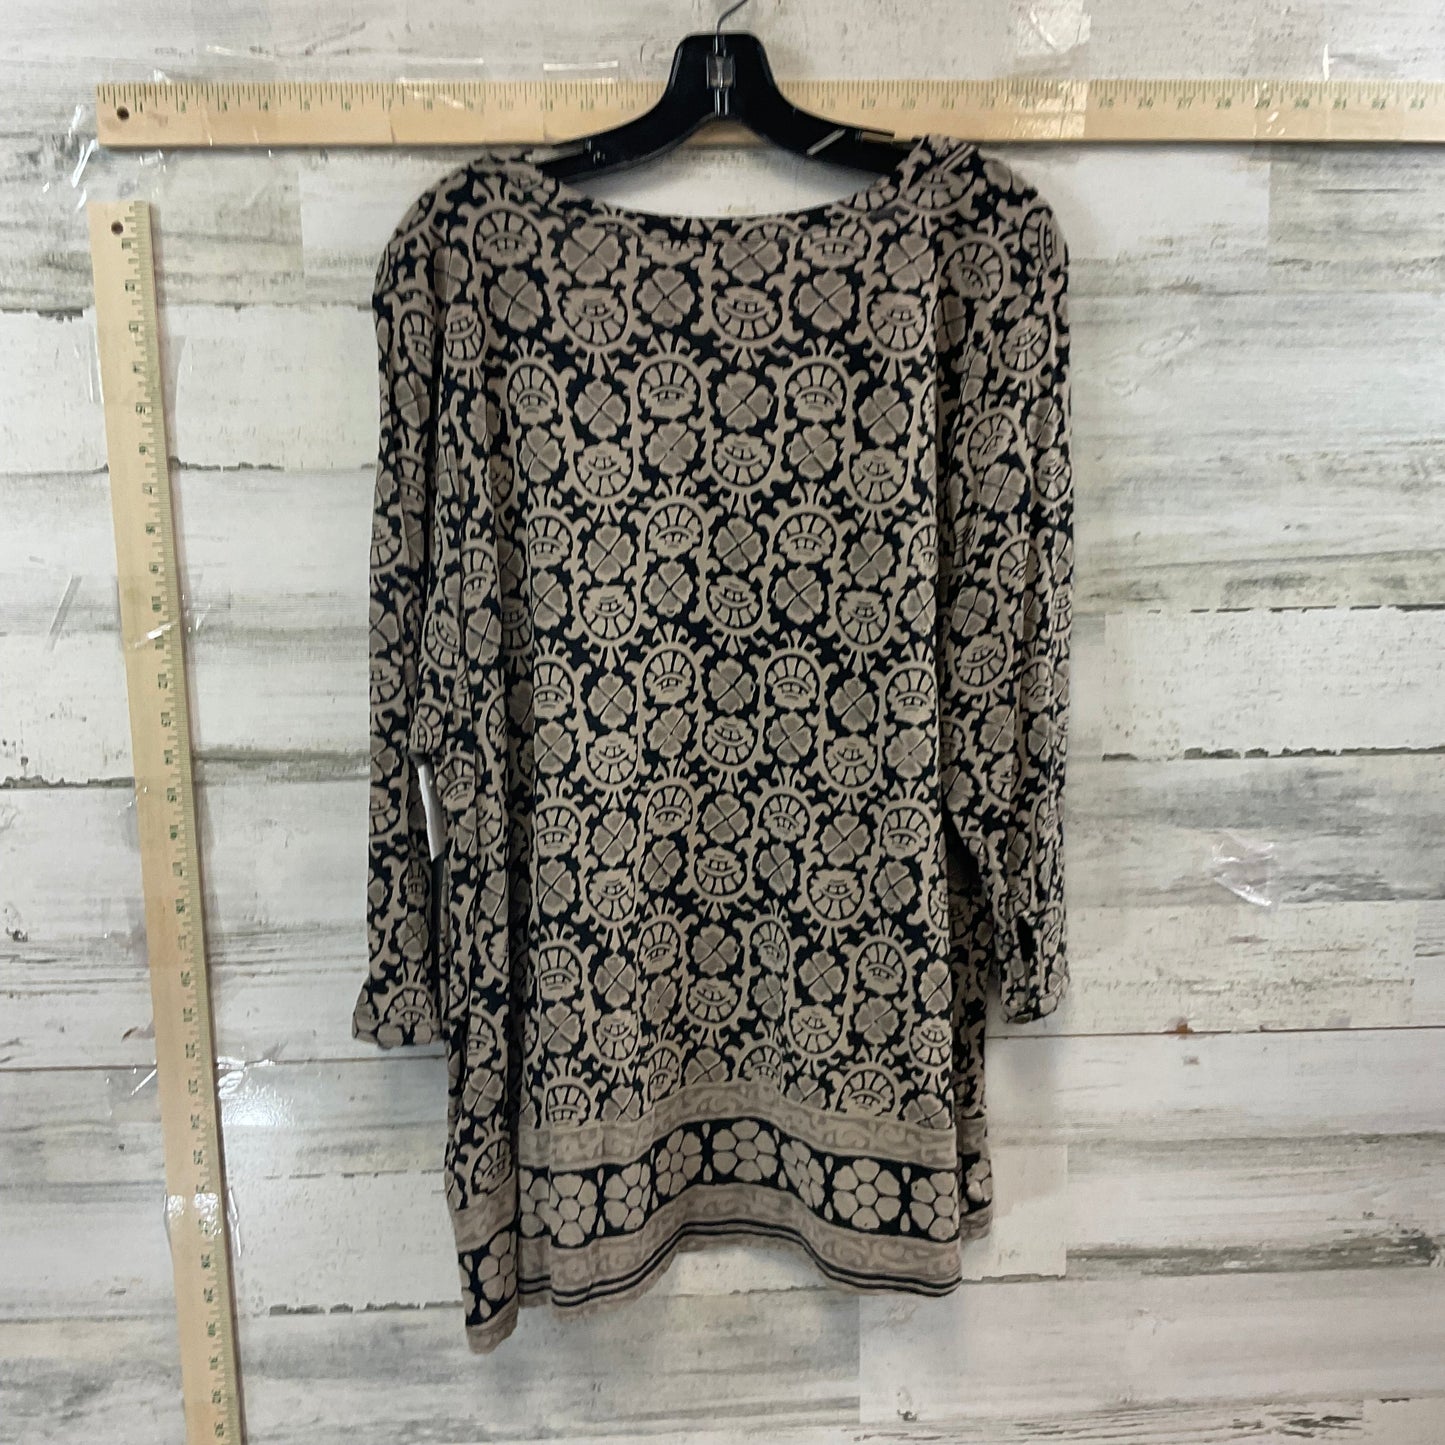 Black & Brown Top 3/4 Sleeve Lucky Brand, Size 3x